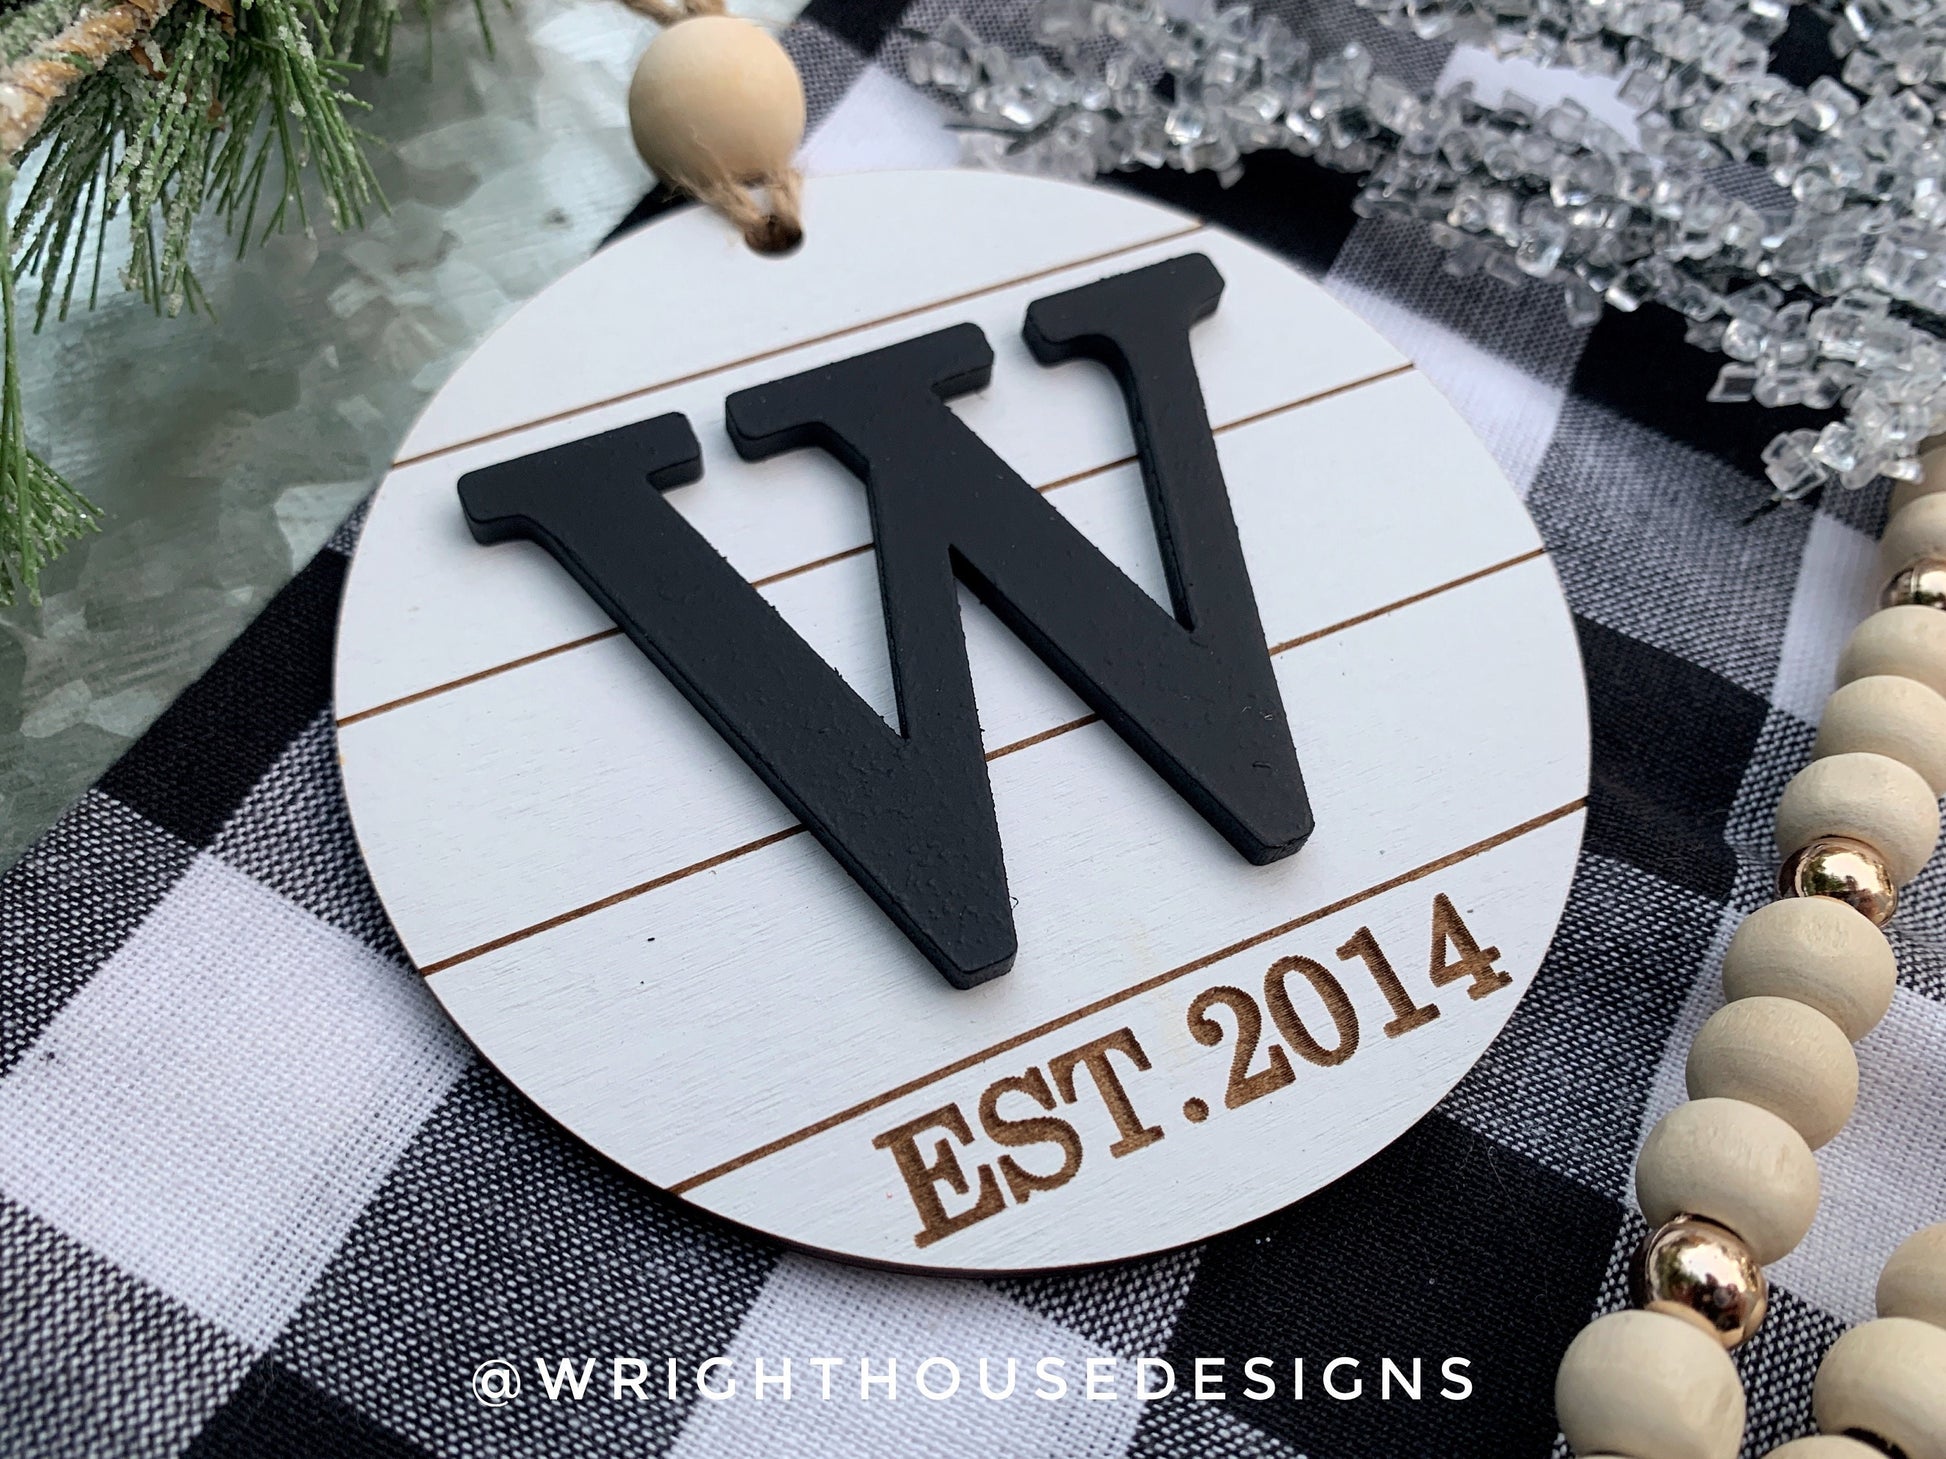 Engraved Established Year and Initial Monogram - Farmhouse Christmas Tree Ornament - Shiplap Stocking Tag - Yearly Holiday Gift for Couples